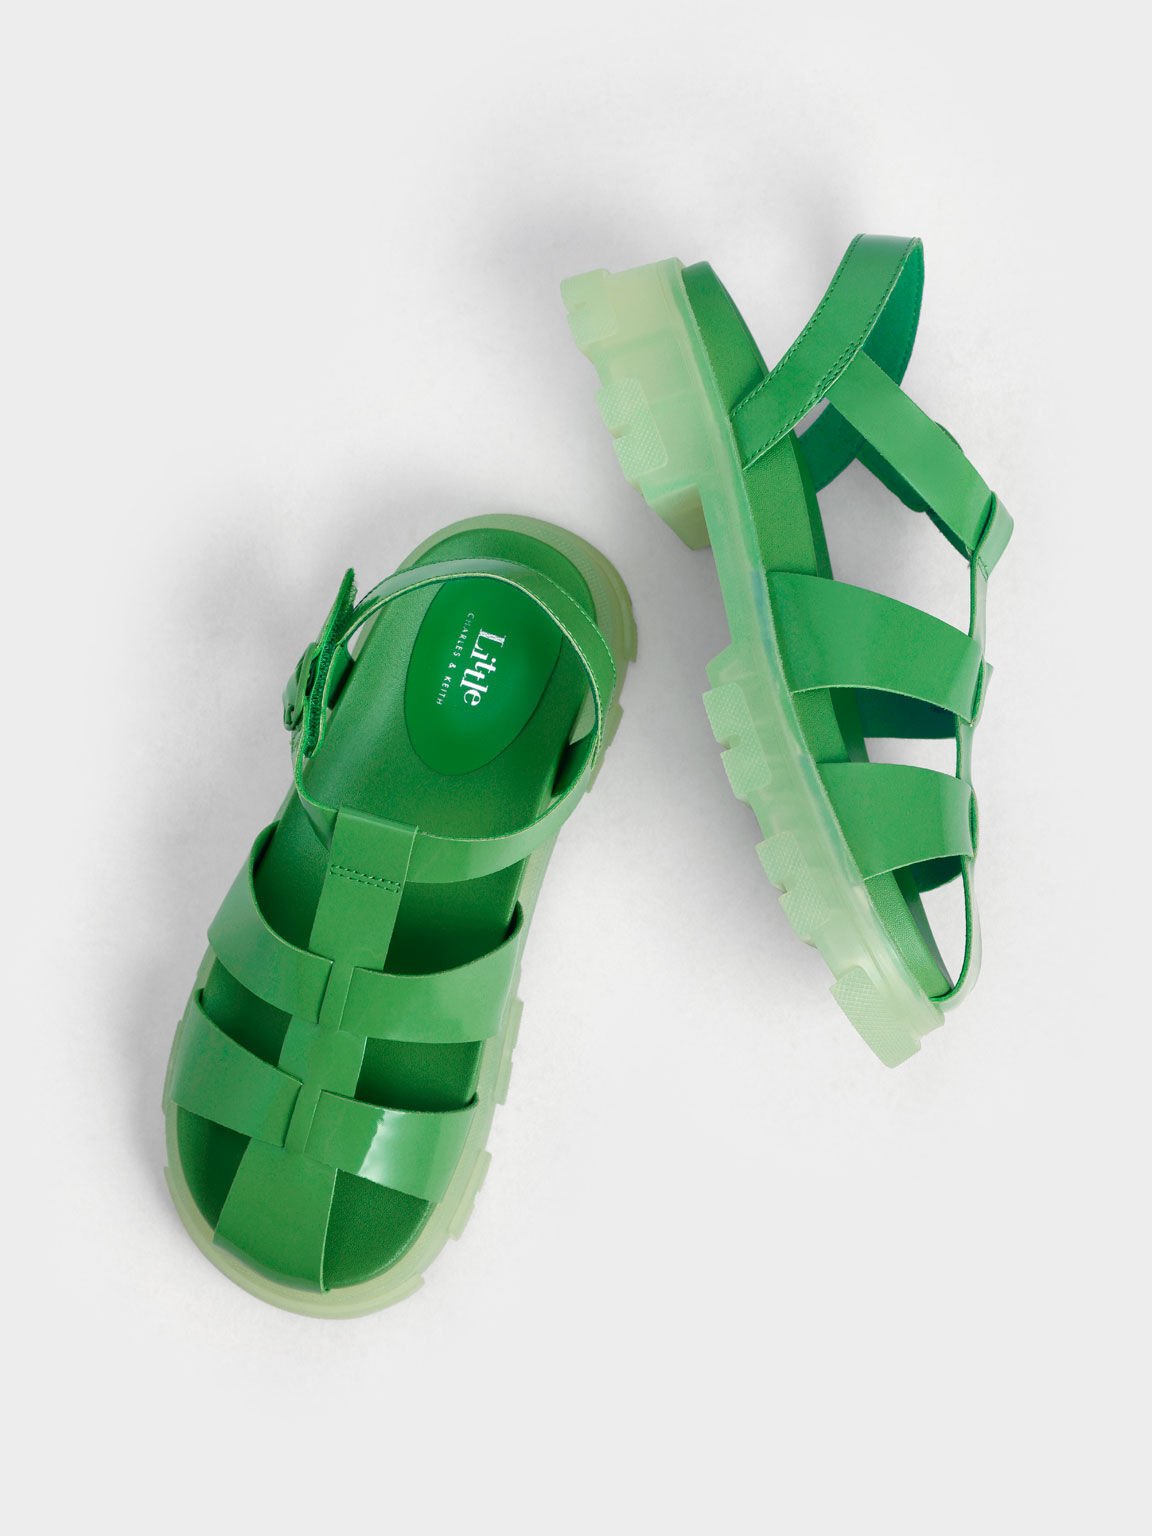 Girls' Patent Caged Sandals, Green, hi-res